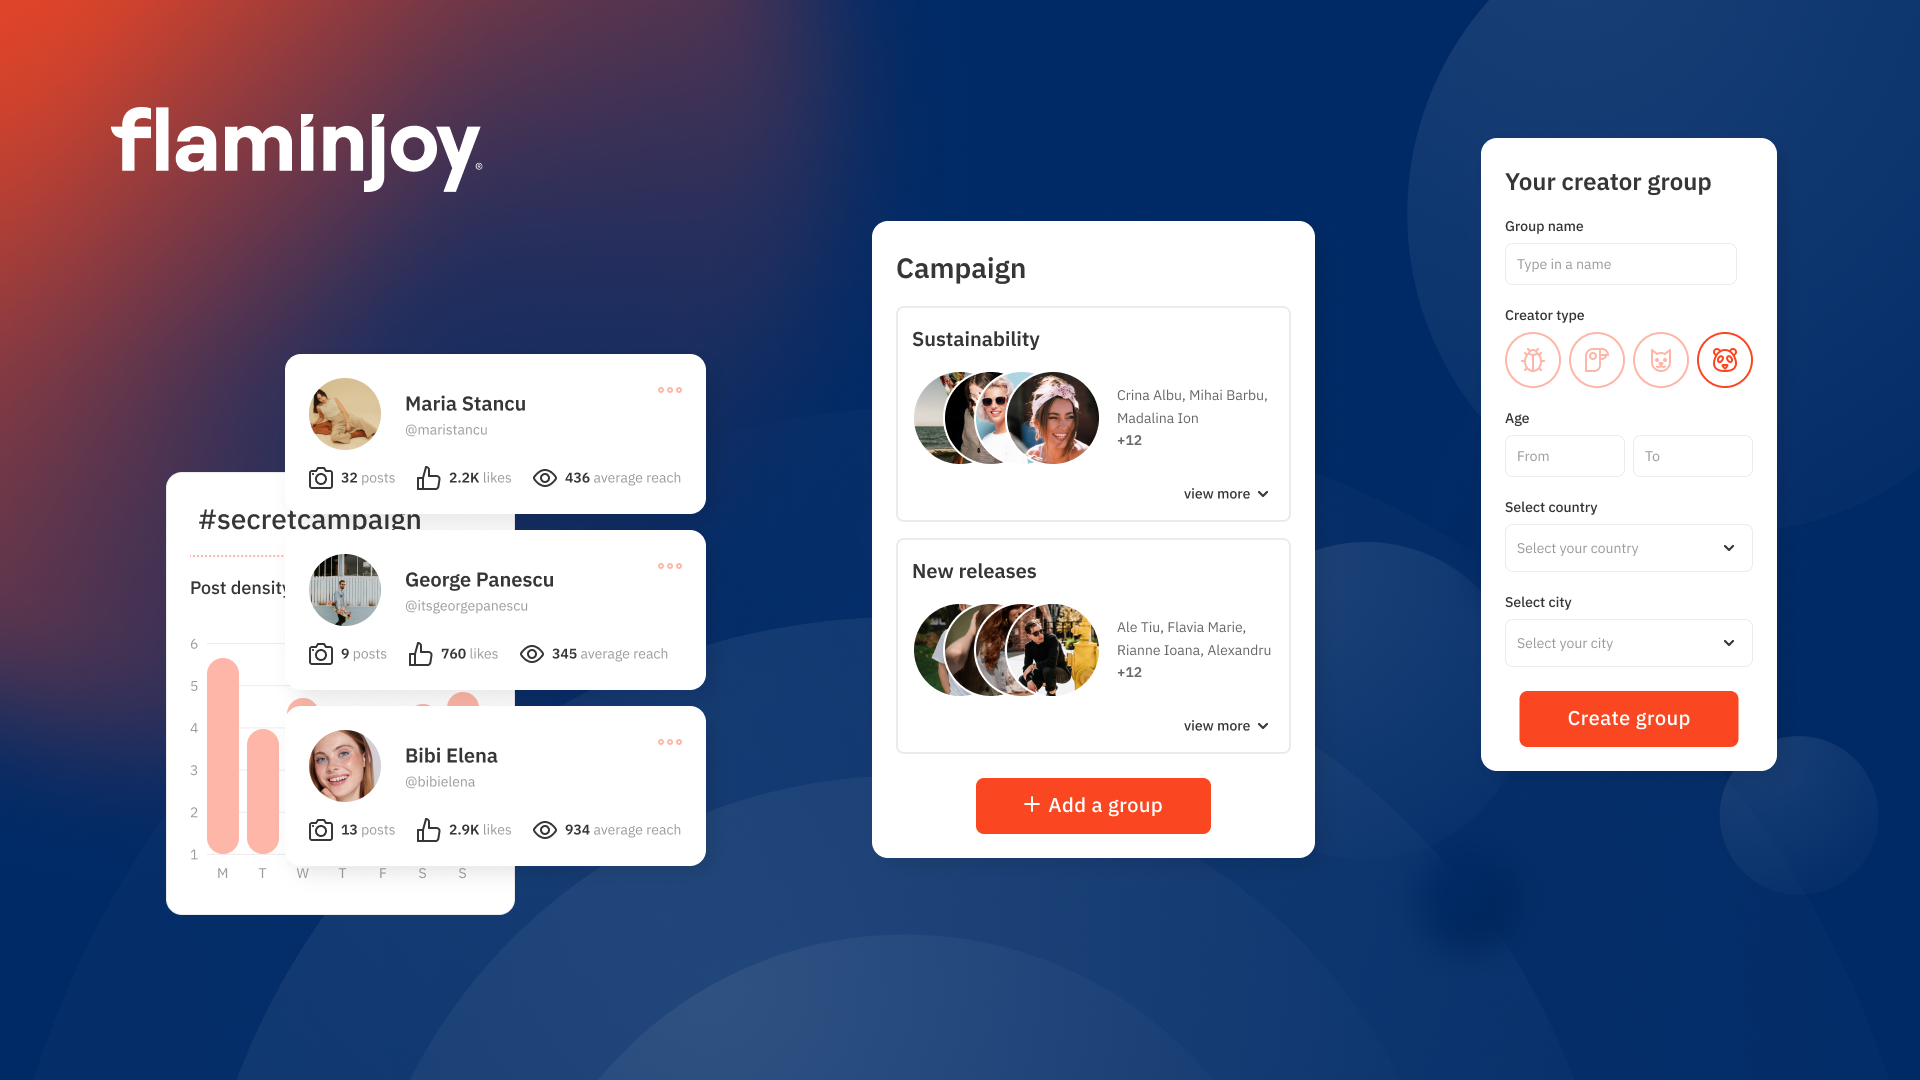 The Creator Campaigns feature helps you collaborate with influencers, getting content and analytics back - in one platform. Simply create a campaign brief, select your influencers and start your campaign - in just a few minutes.